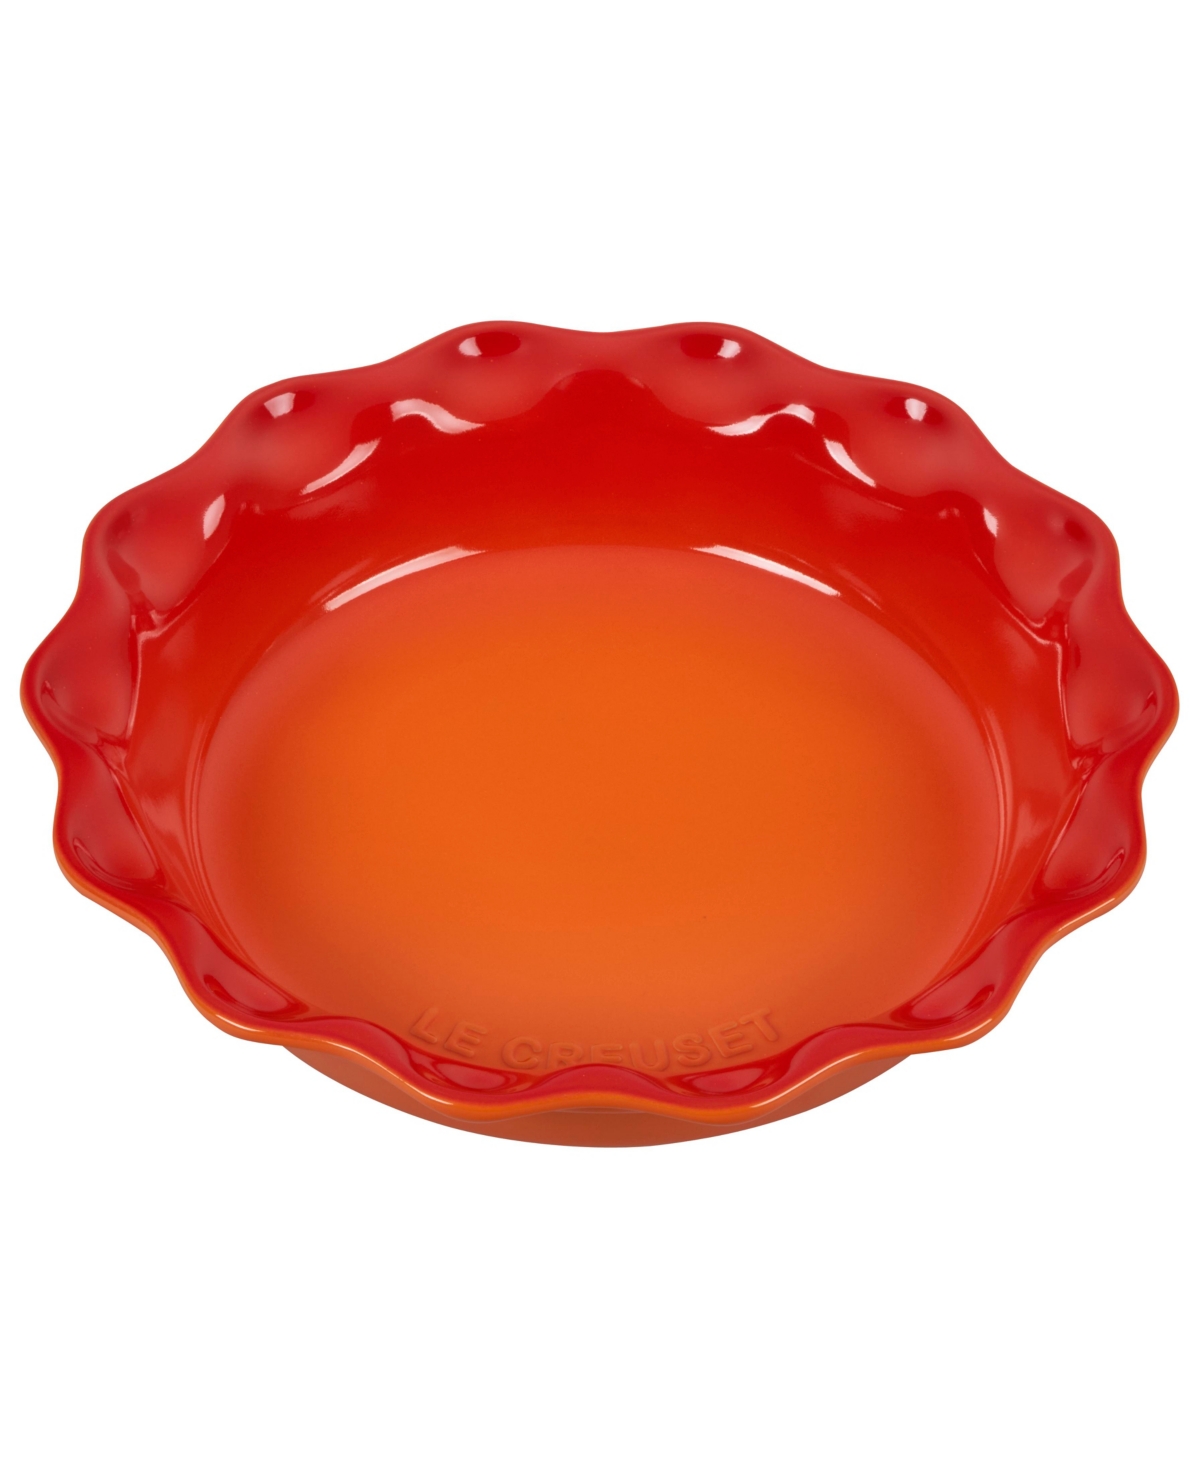 Le Creuset 9" Stoneware Pie Dish In Flame